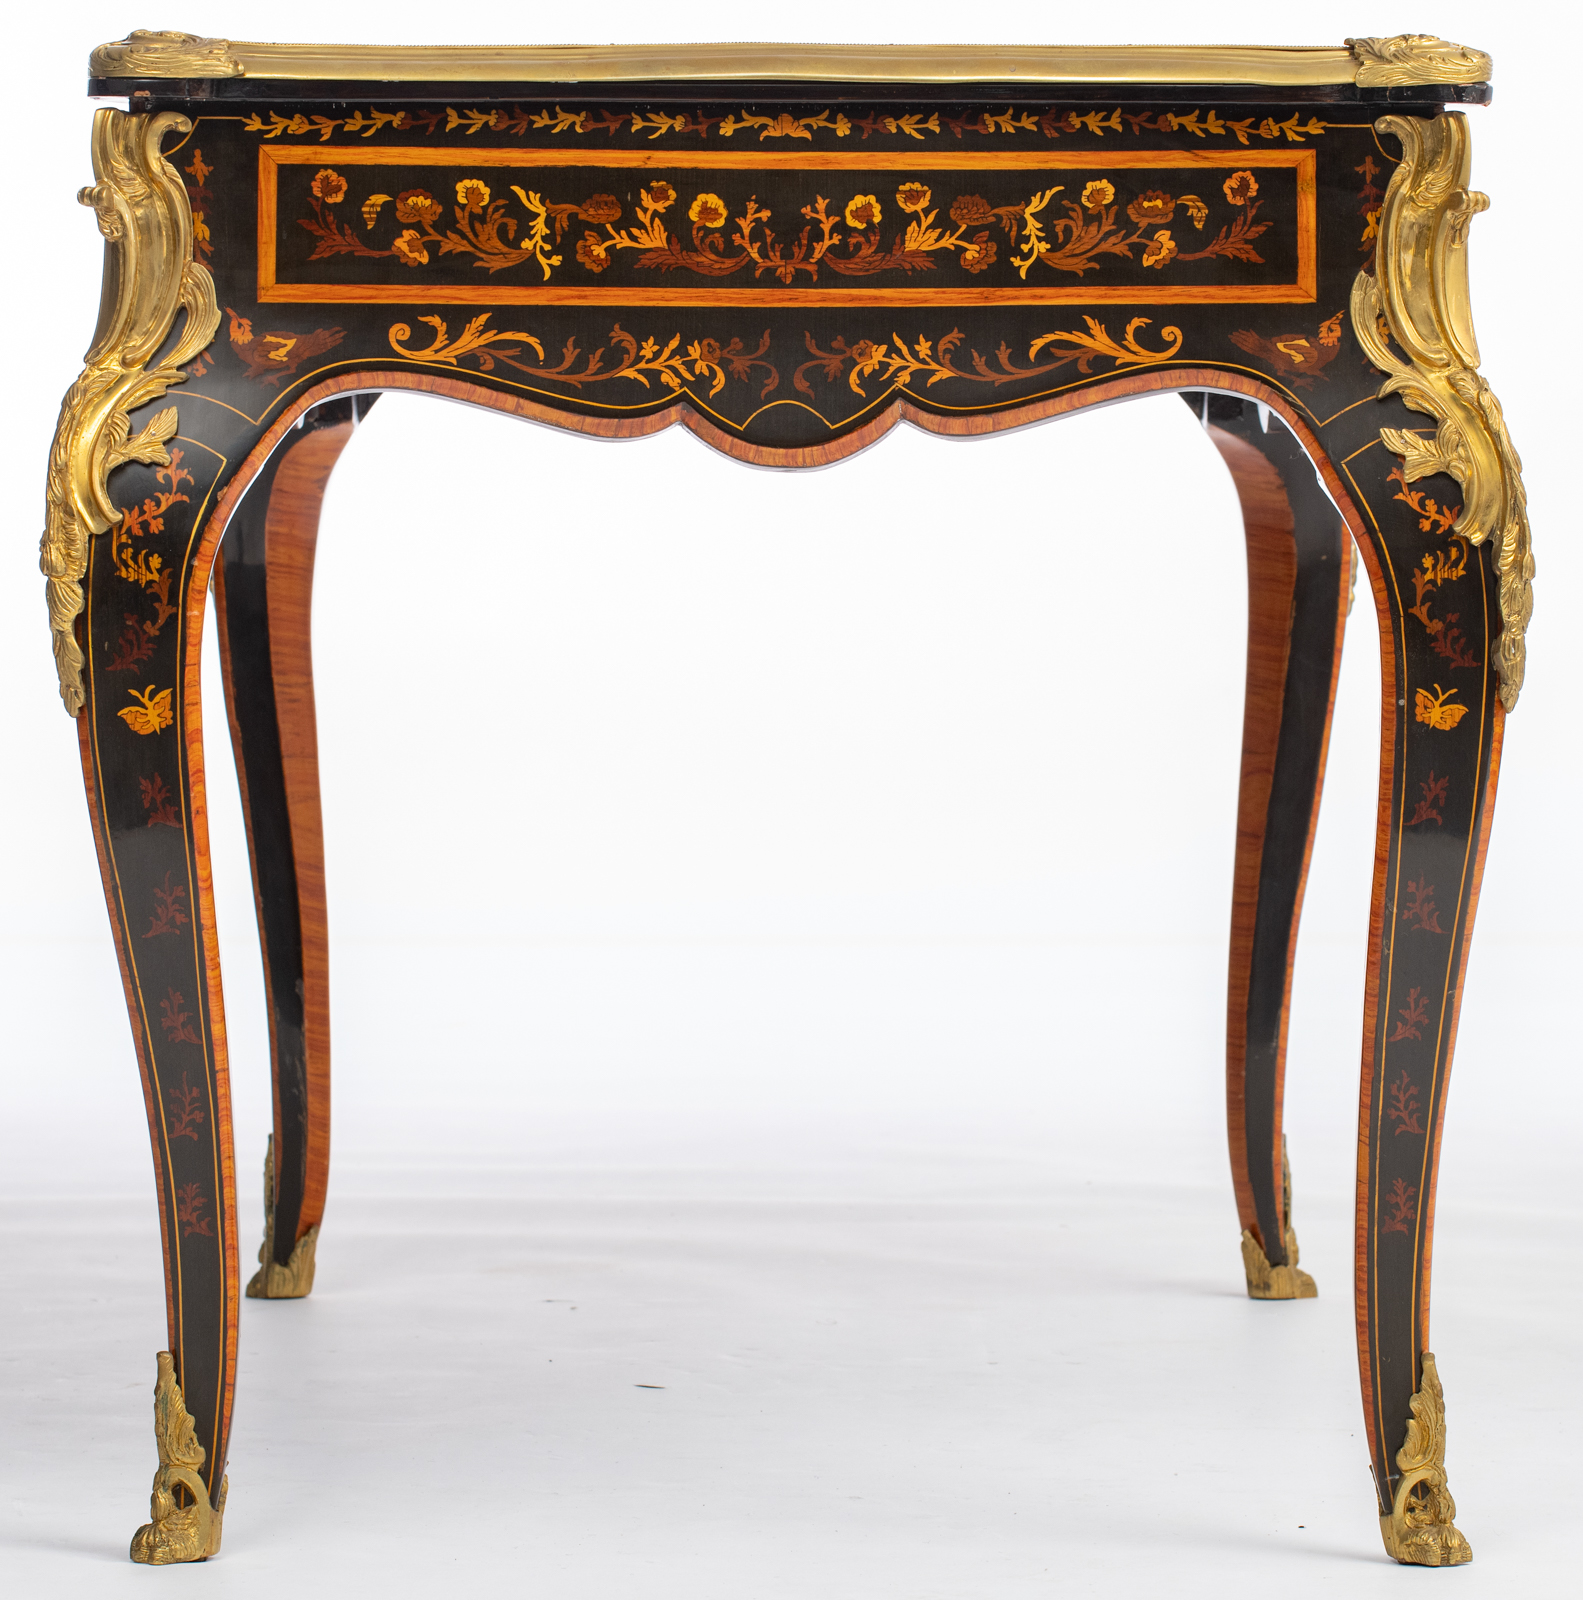 A fine Louis XV style lacquered bureau plat, decorated with gilt bronze mounts and rich marquetry of - Image 3 of 8